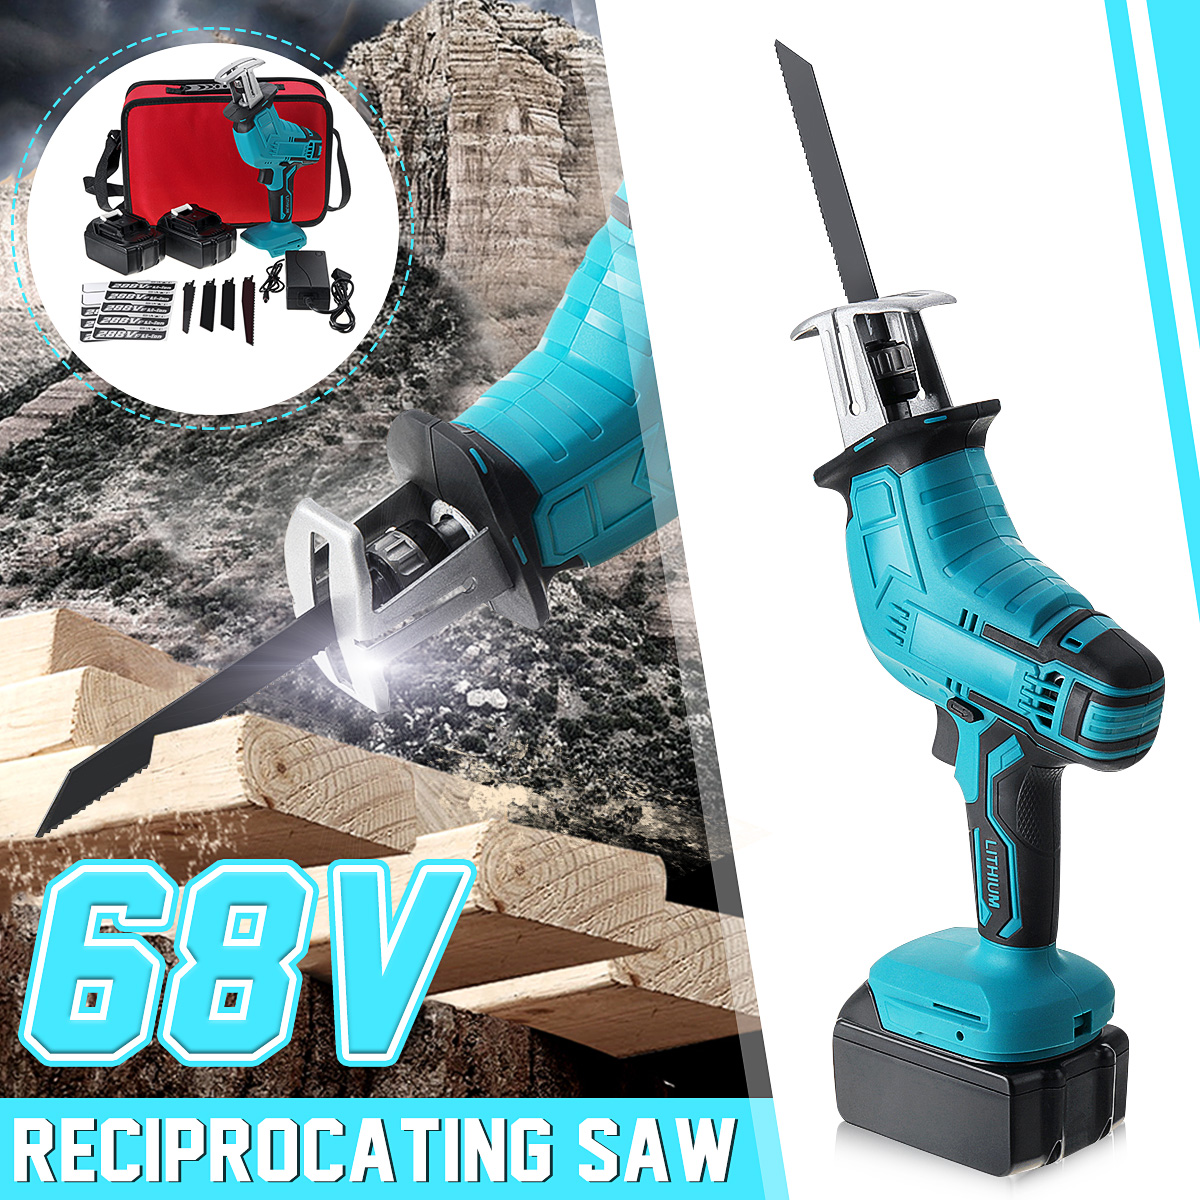 68V-Electric-Reciprocating-Saw-Outdoor-Woodworking-Cordless-Handheld-Saw-9000mah-1683596-2